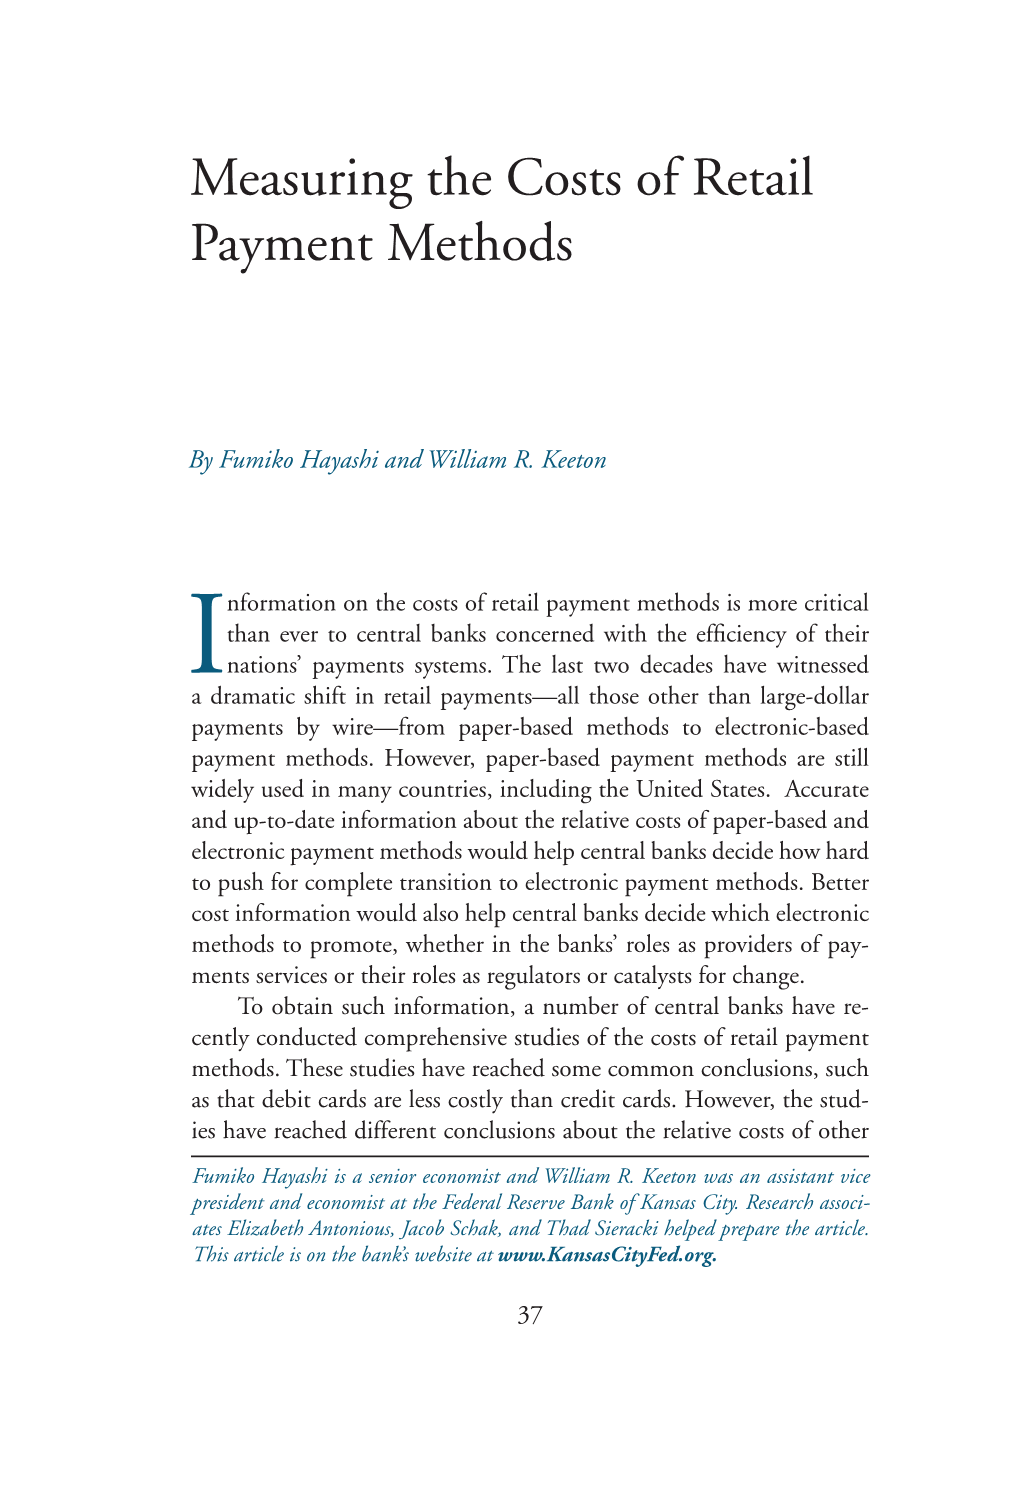 Measuring the Costs of Retail Payment Methods